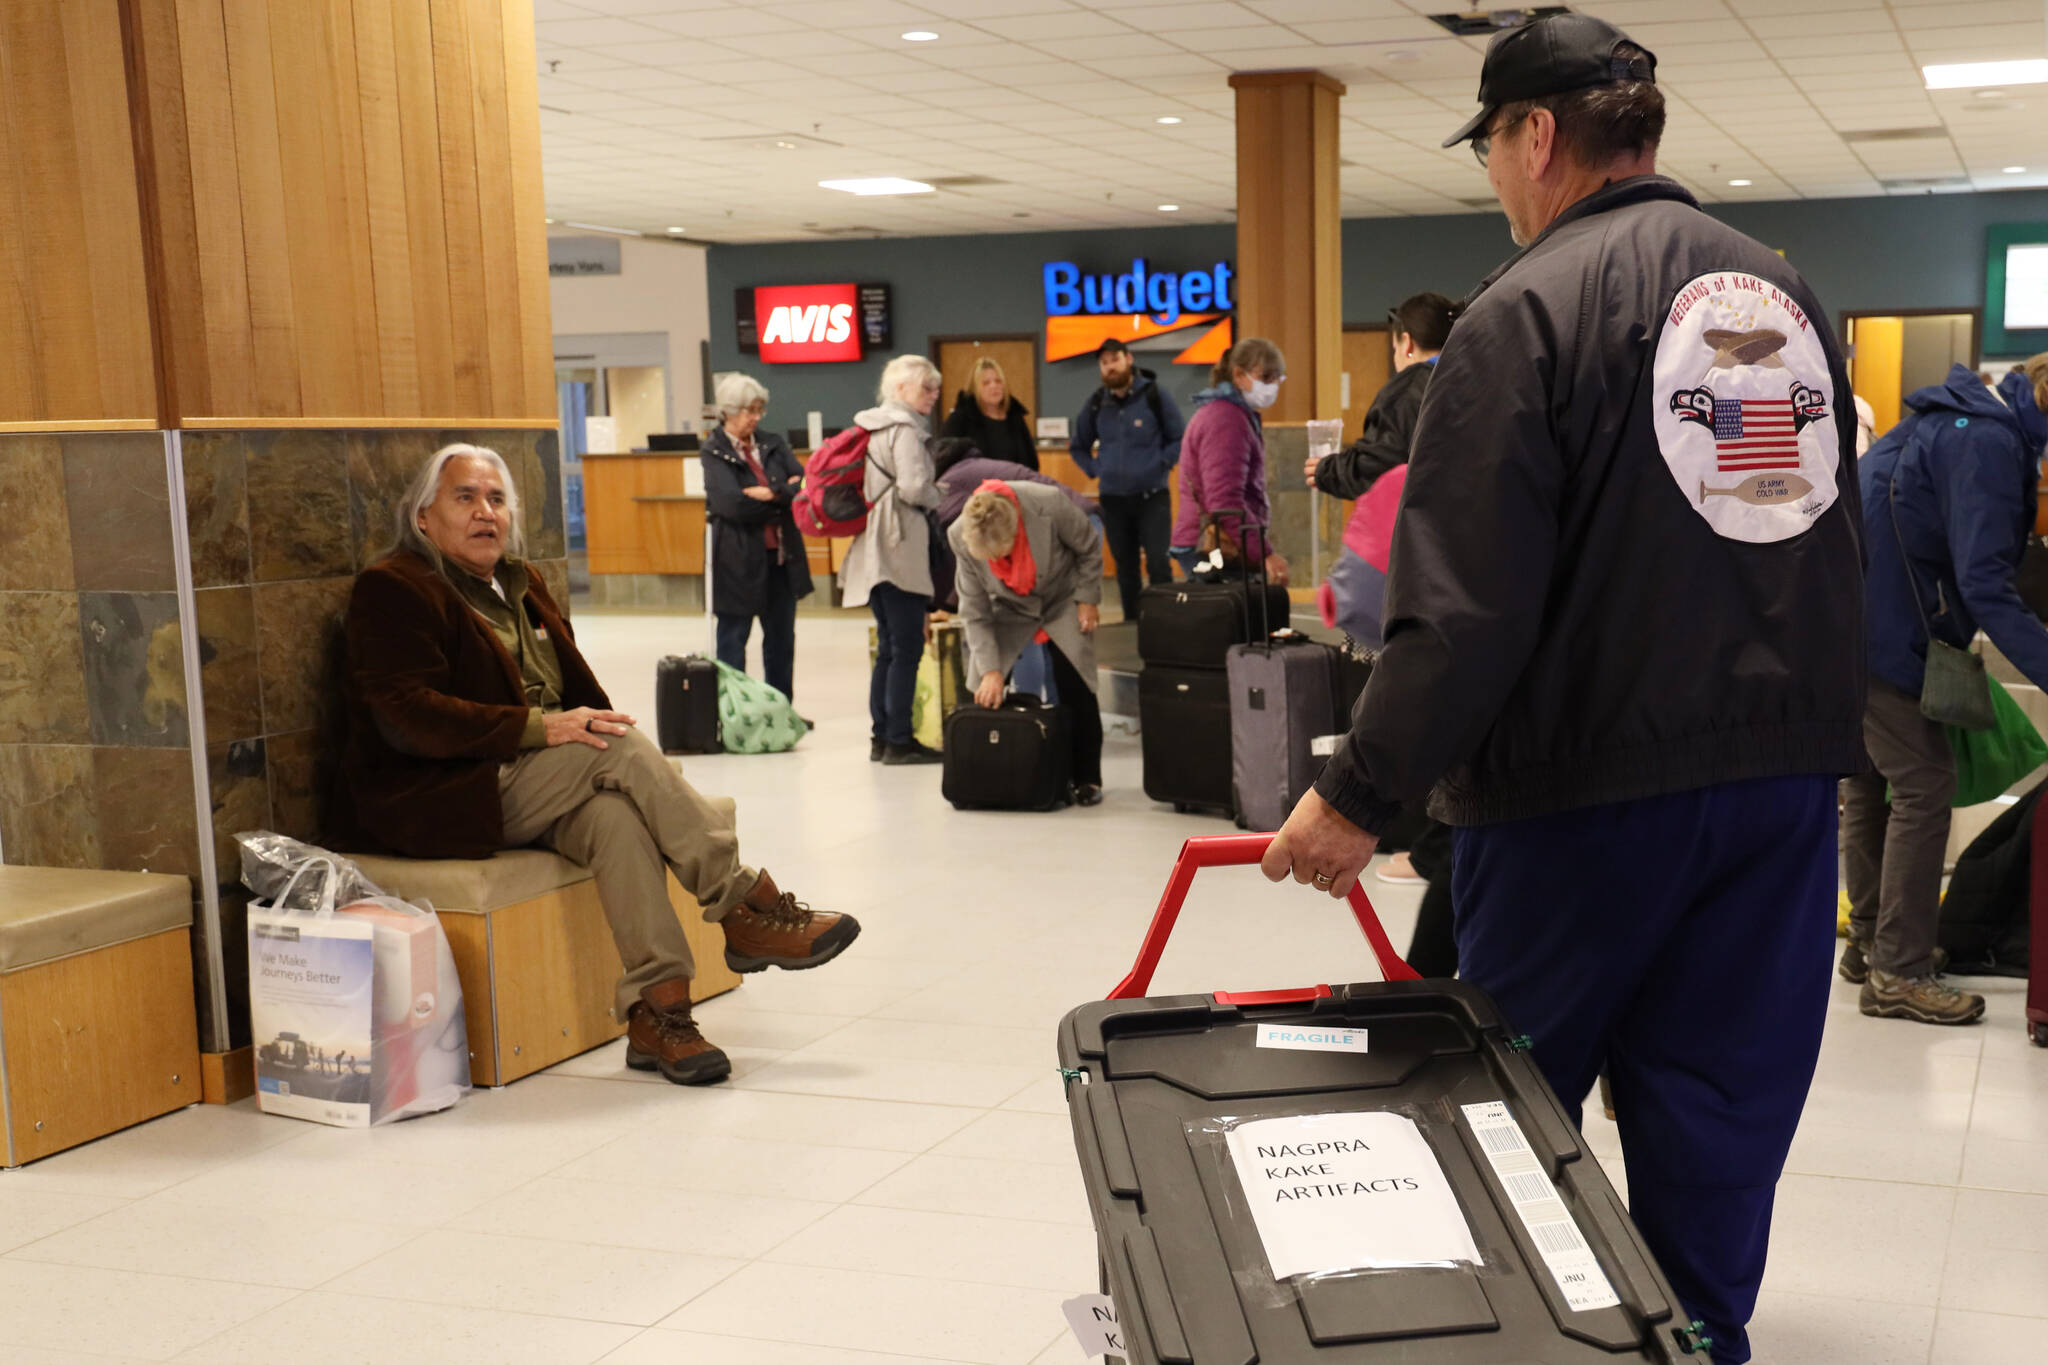 Frank Hughes pulls a tote filled with Alaska Native artifacts at the Juneau International Airport Thursday afternoon. Hughes is apart of the repatriation effort to retrieve the artifacts back to the Organized Village of Kake from George Fox University in Oregon. (Clarise Larson / Juneau Empire)